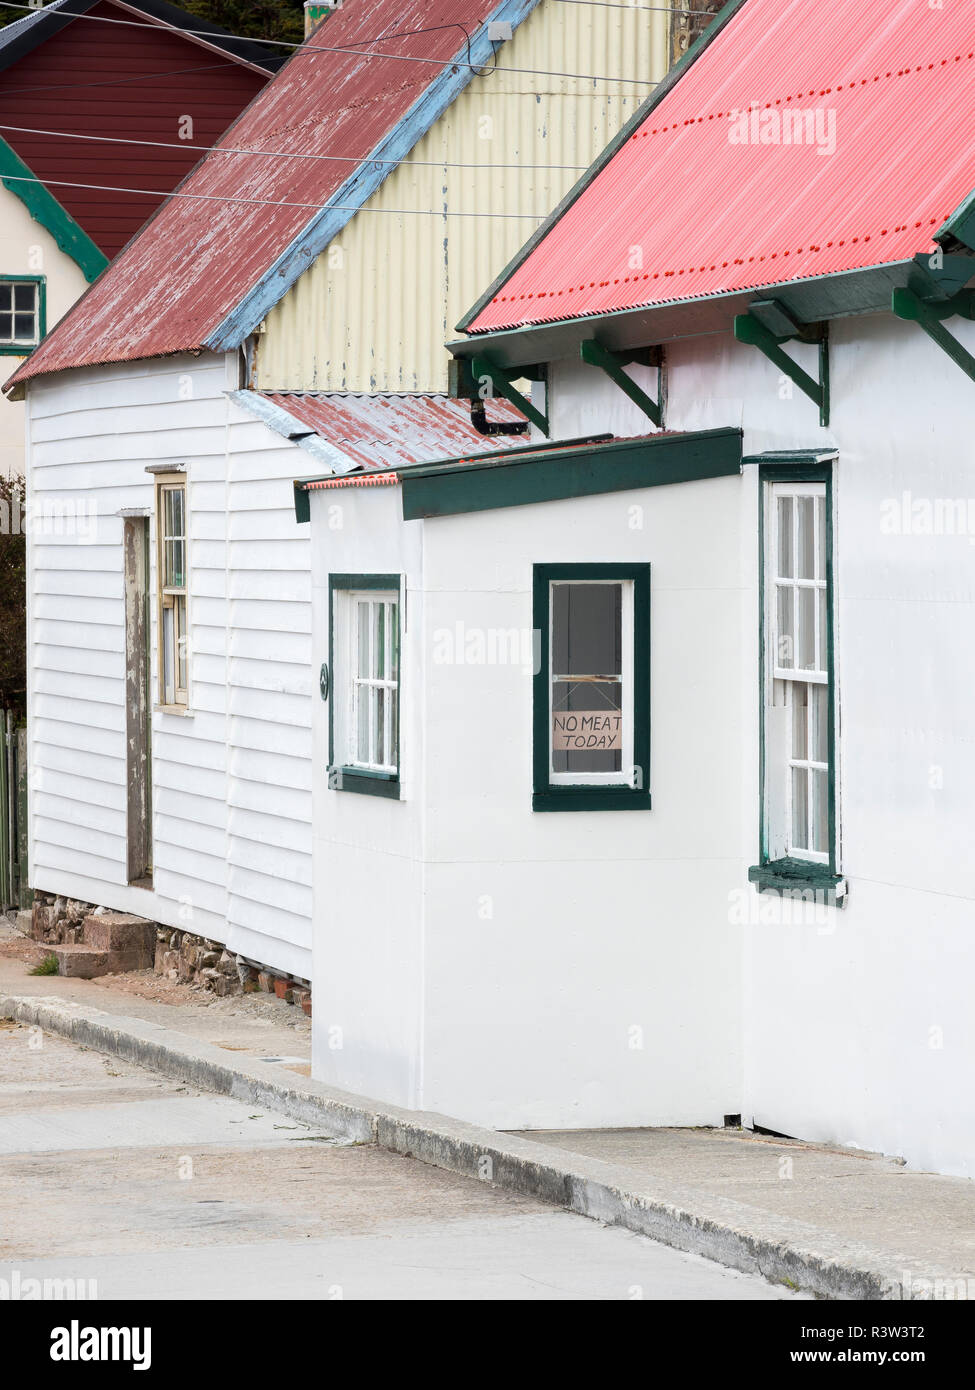 Colonists cottages, the old town of Stanley, capital of the Falkland Islands. (Editorial Use Only) Stock Photo